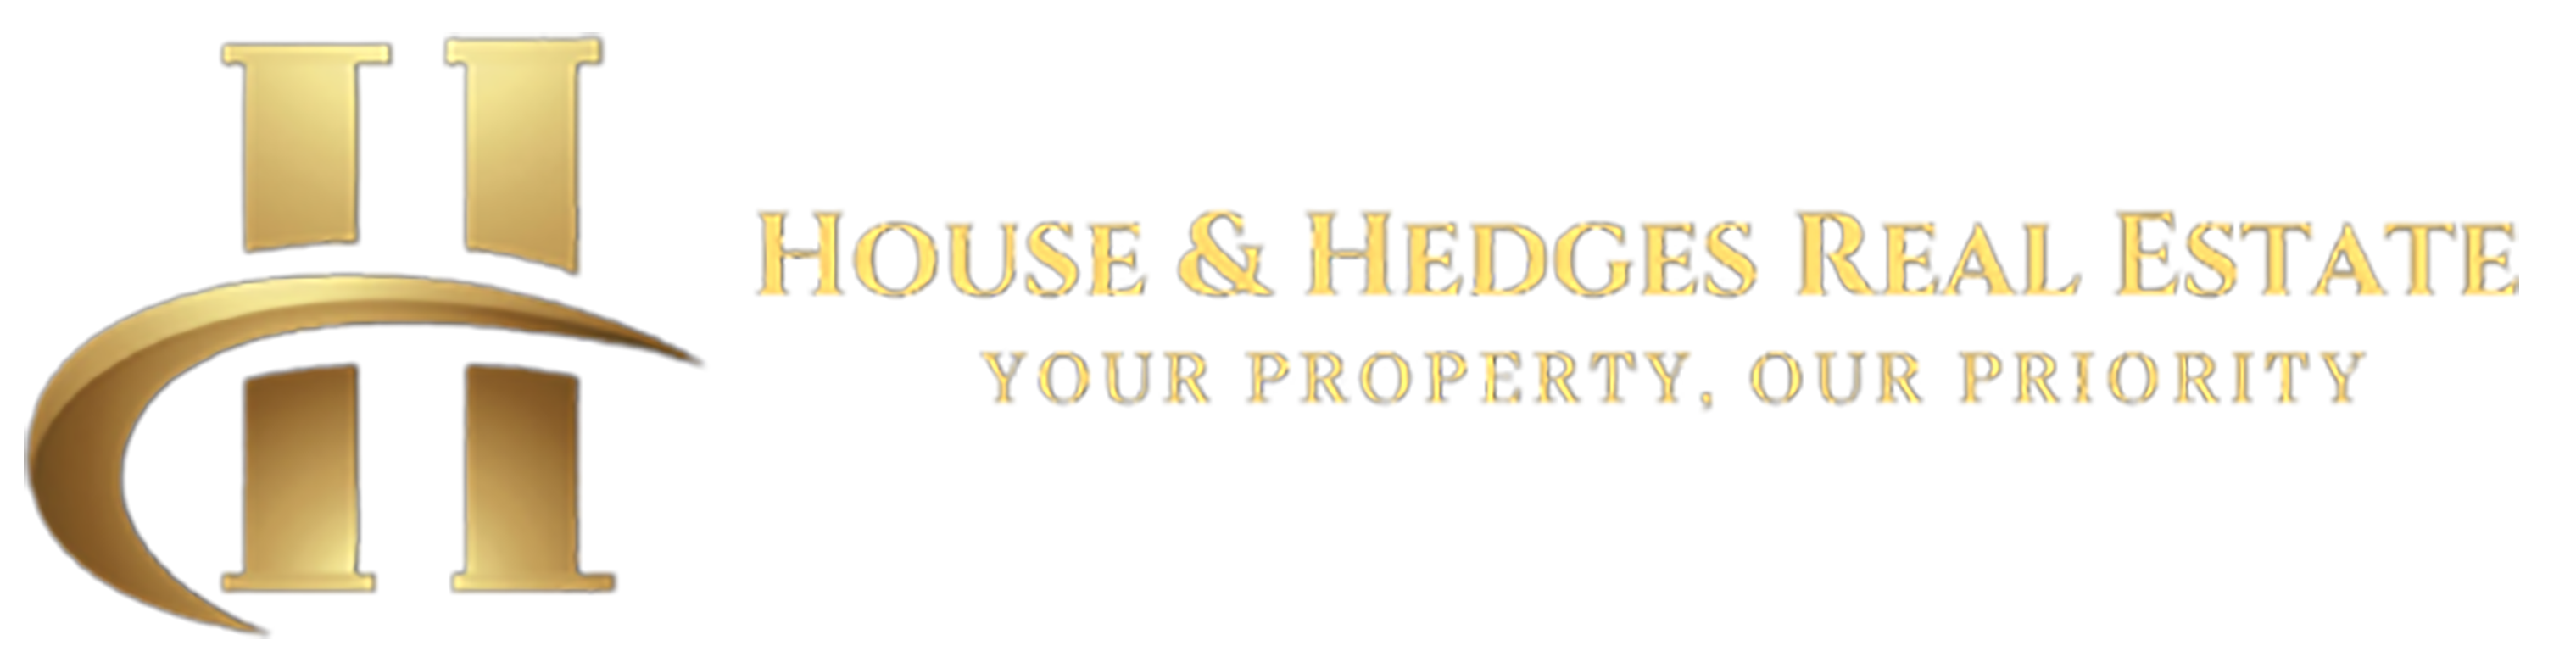 House and Hedges Real Estate